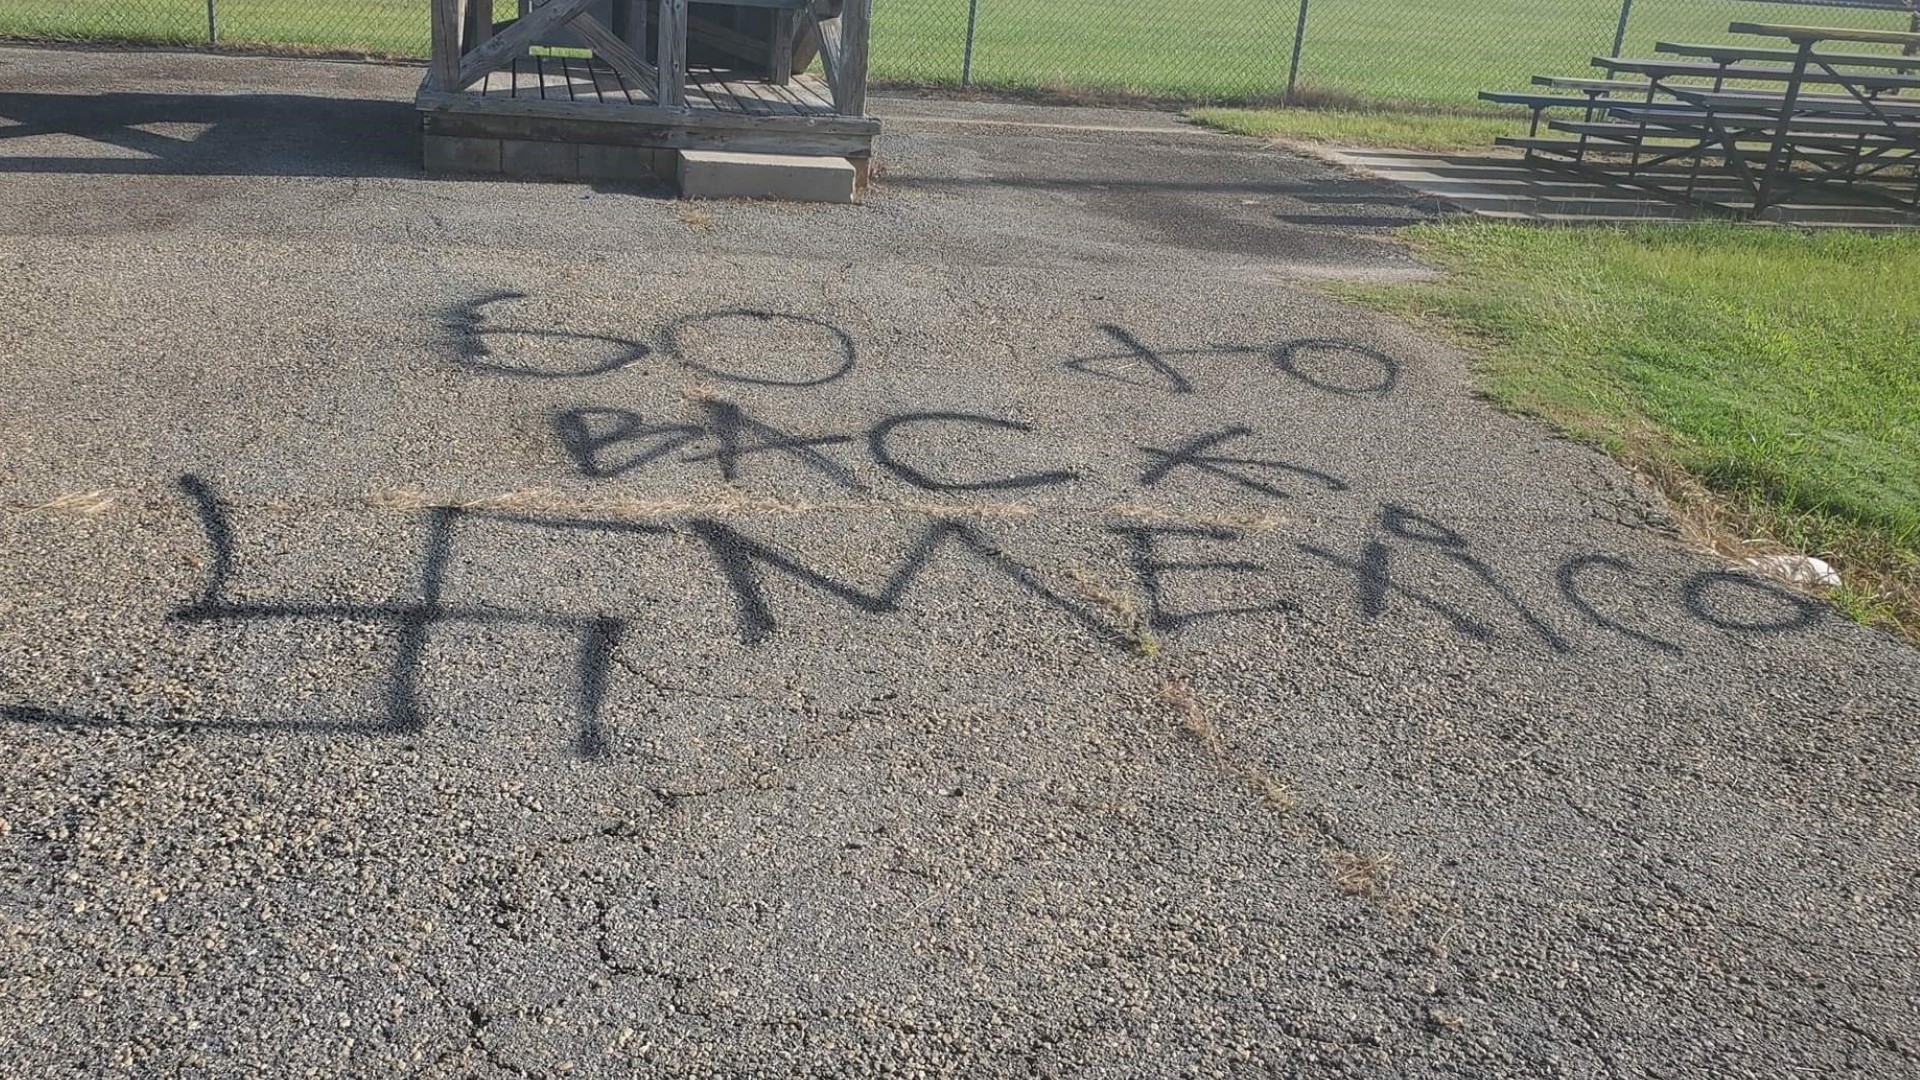 The spray painted words in the park read 'Go back to Mexico' along with a swastika.